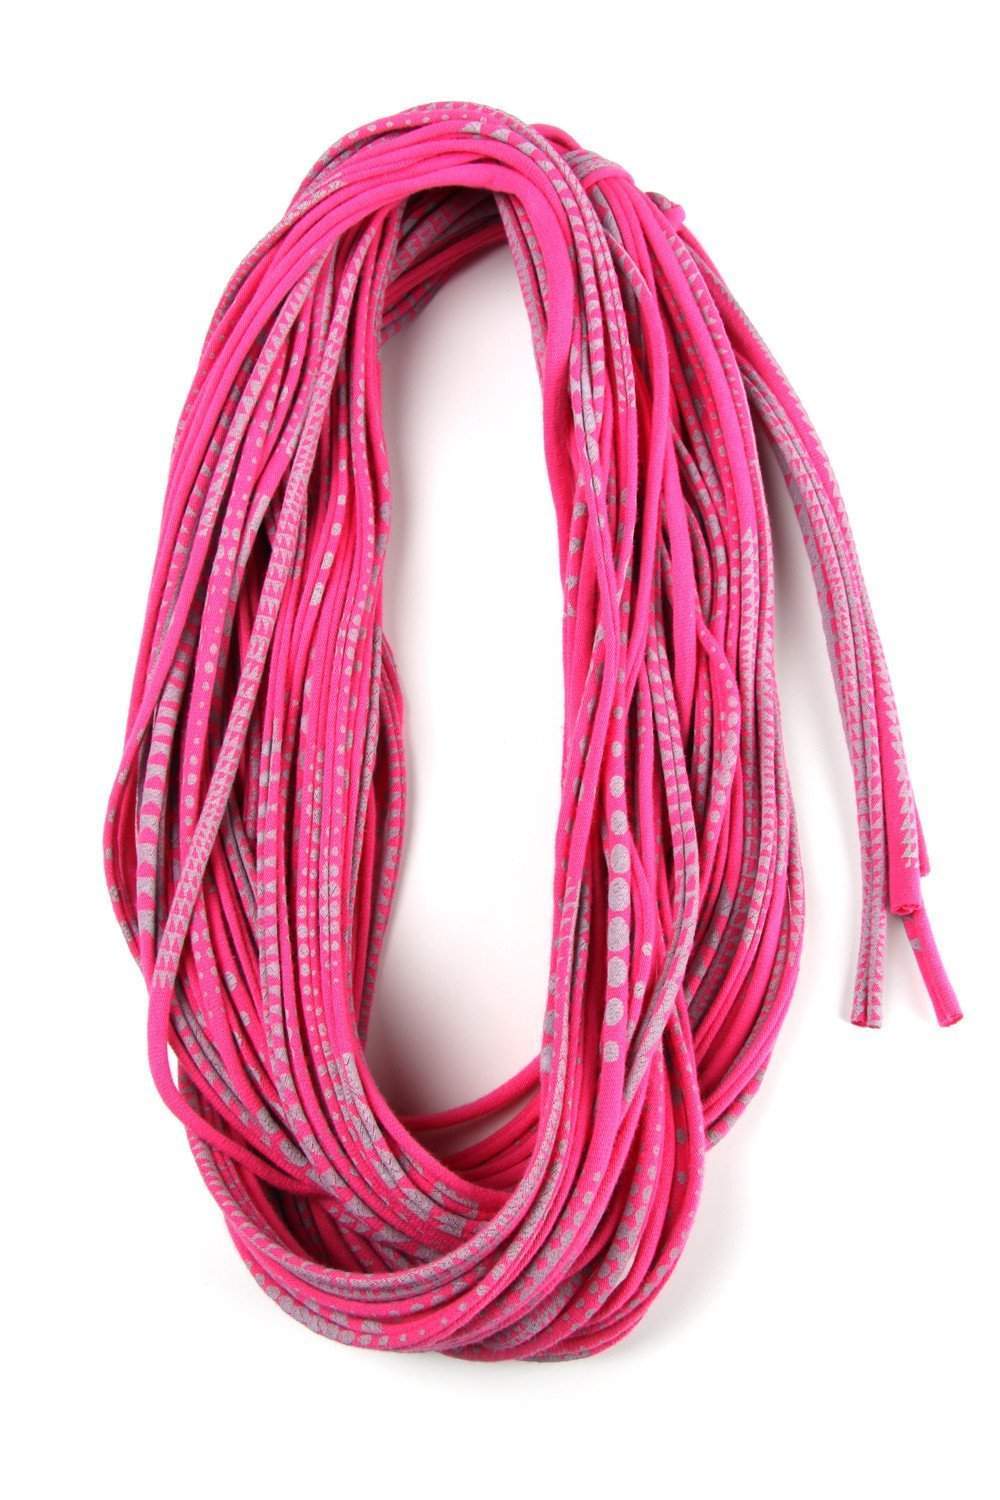 infinity scarves-Hot Pink Gray Infinity Scarf-Necklush